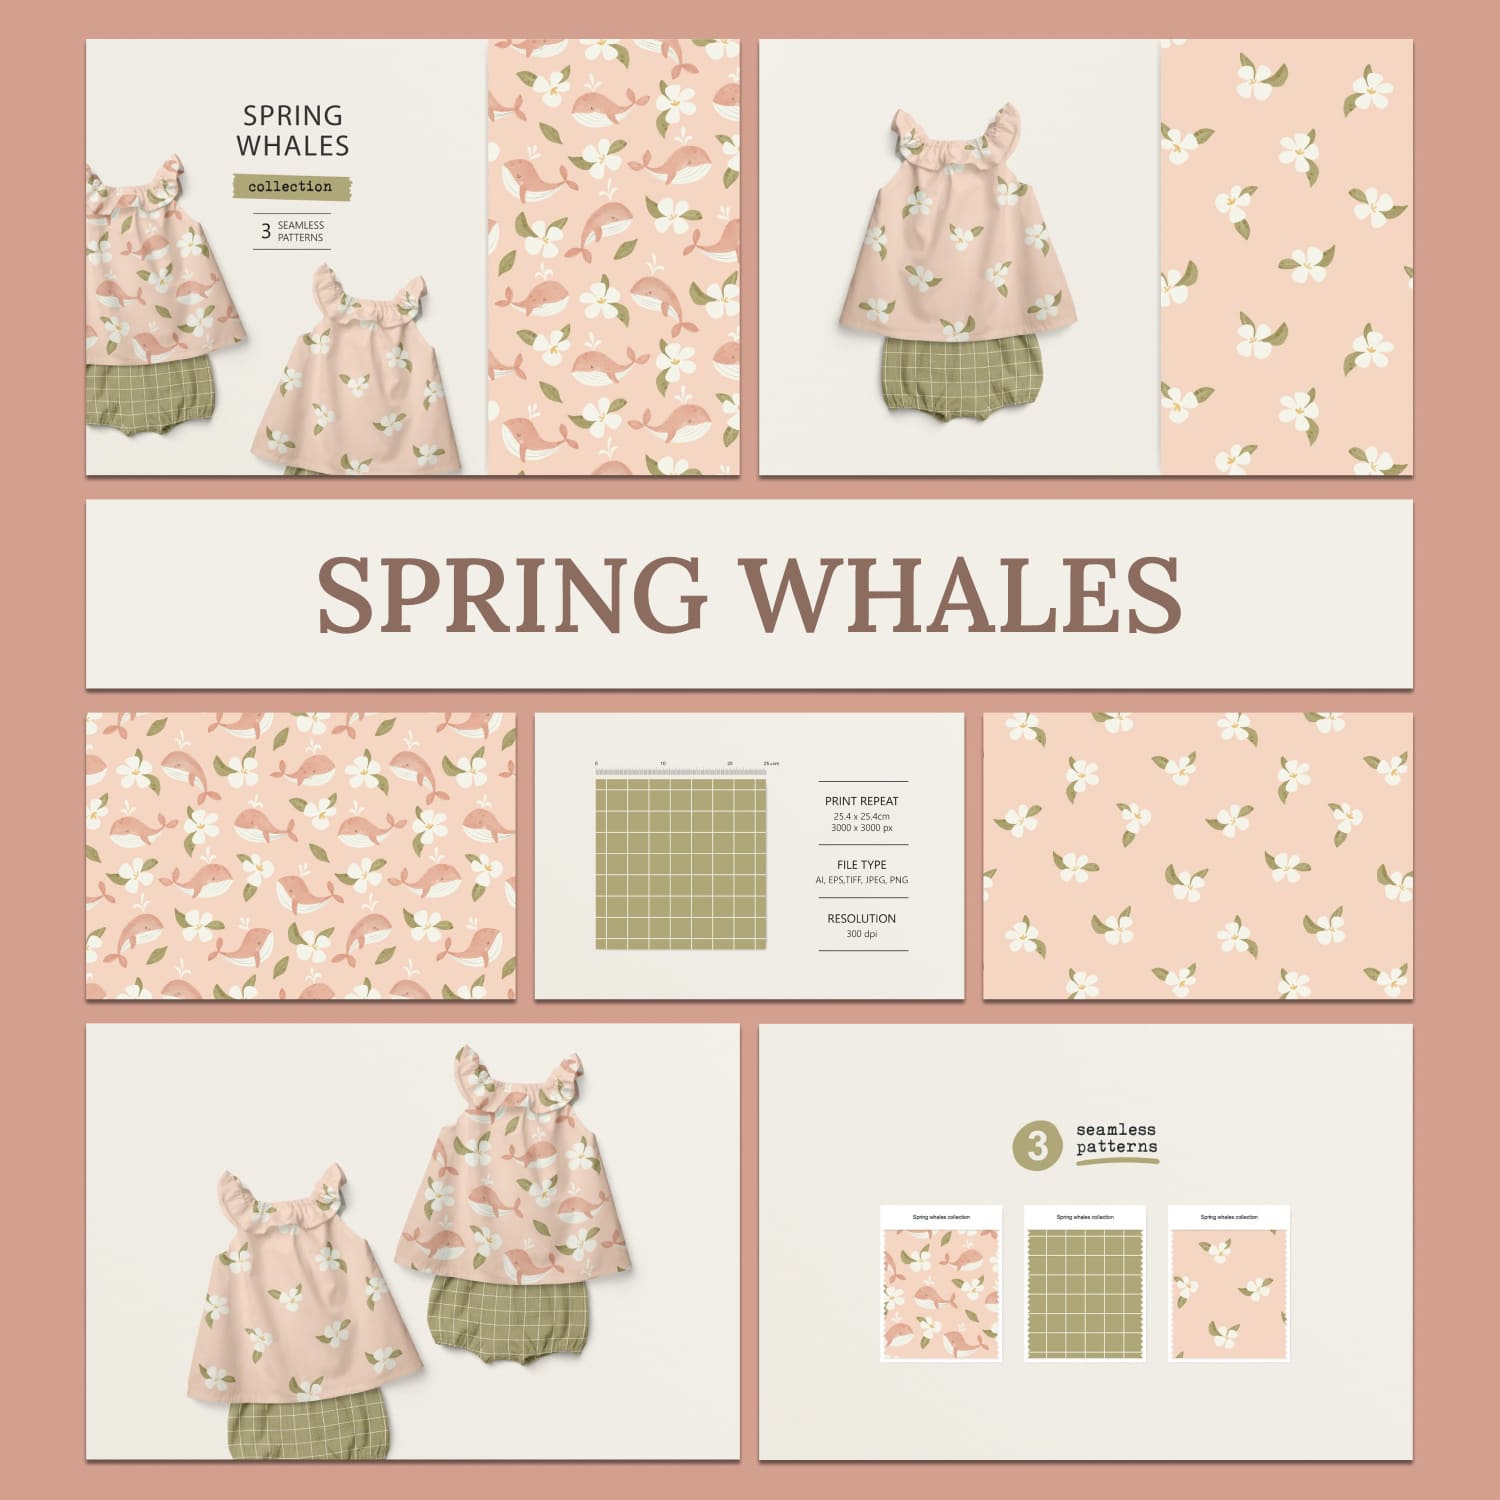 Spring Whales Patterns Collection cover image.